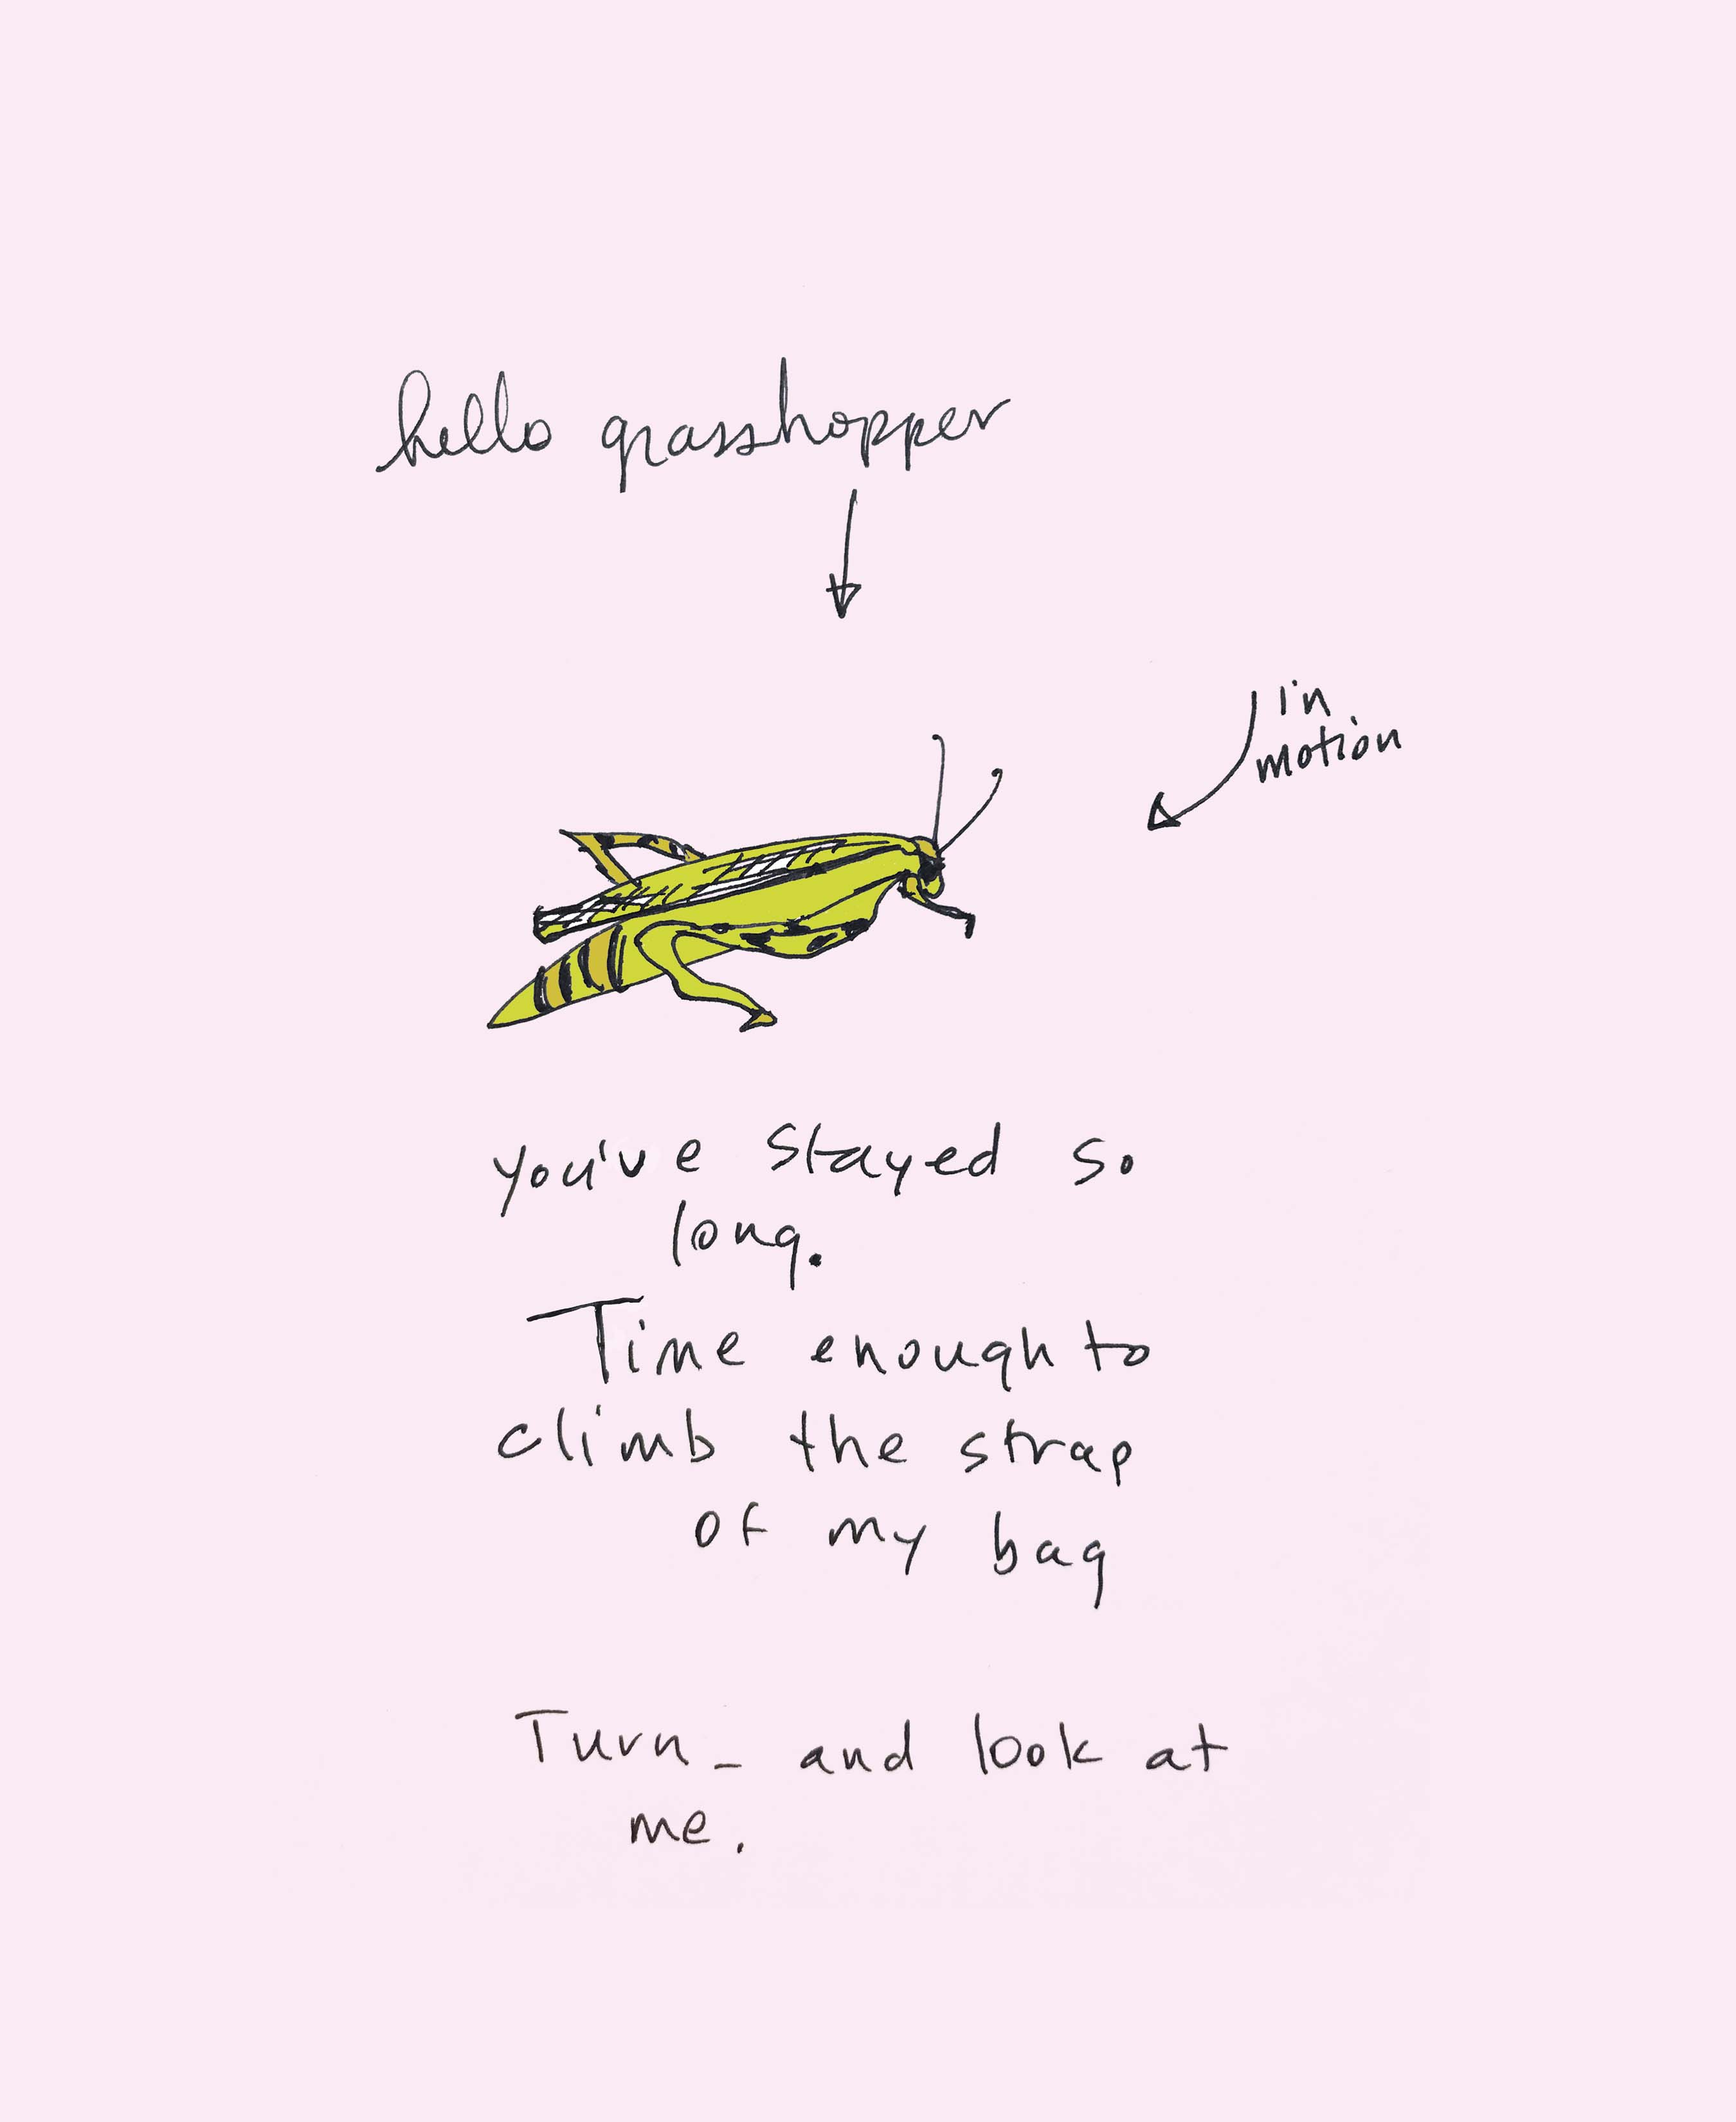 art every day number 395 grasshopper slowing down enjoy